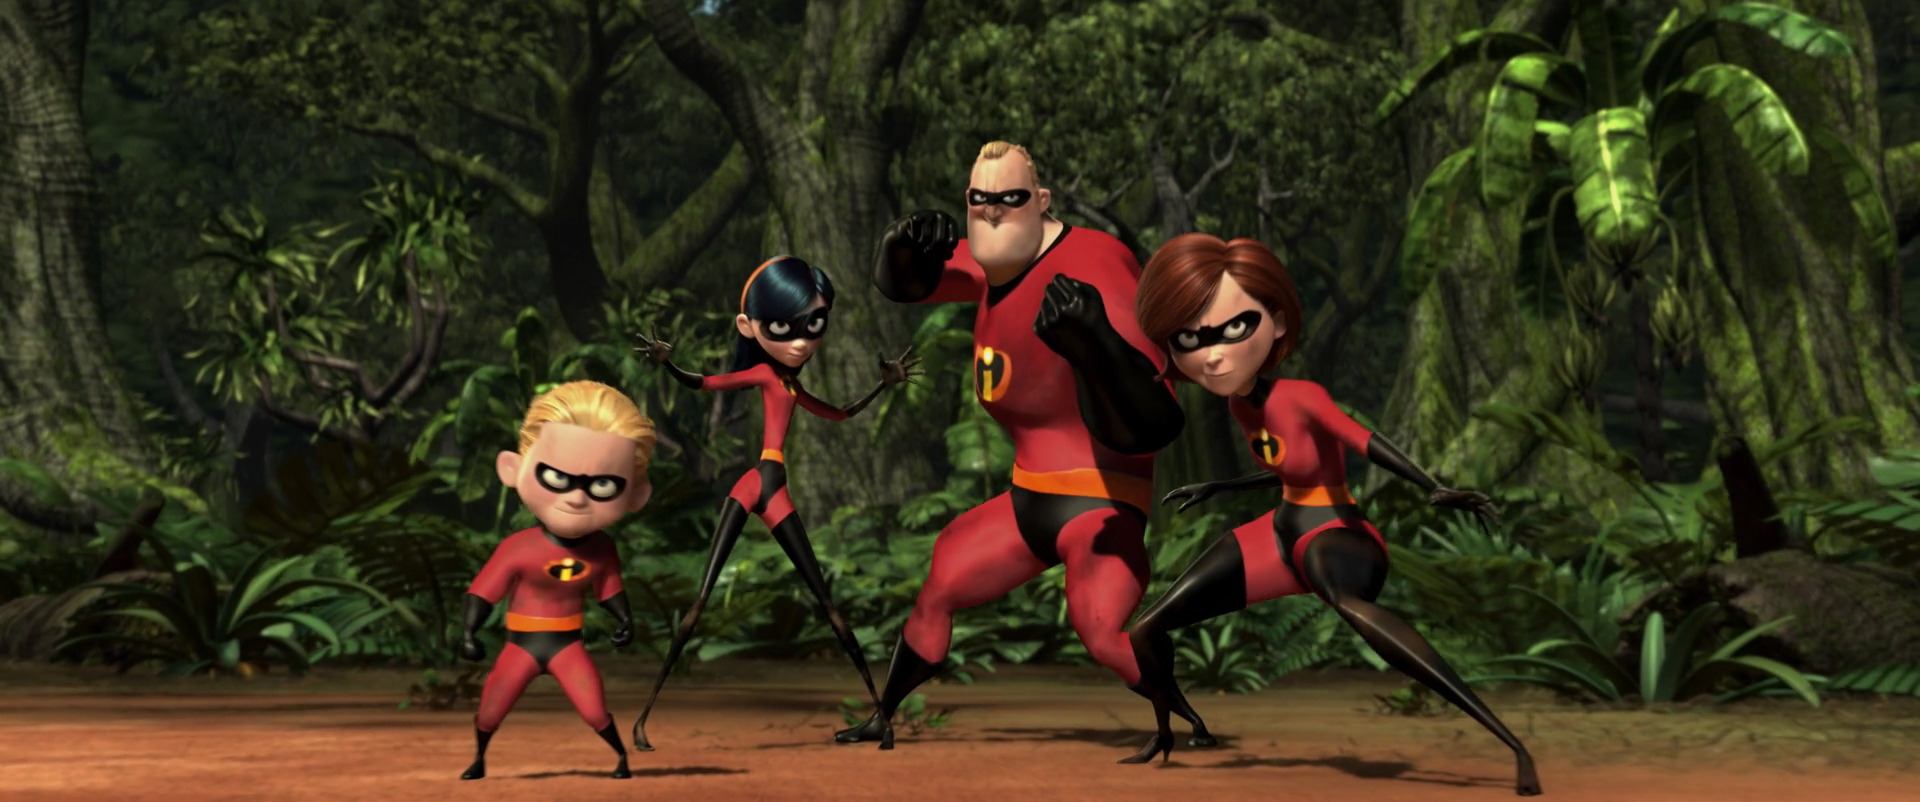 Amazing The Incredibles Pictures & Backgrounds